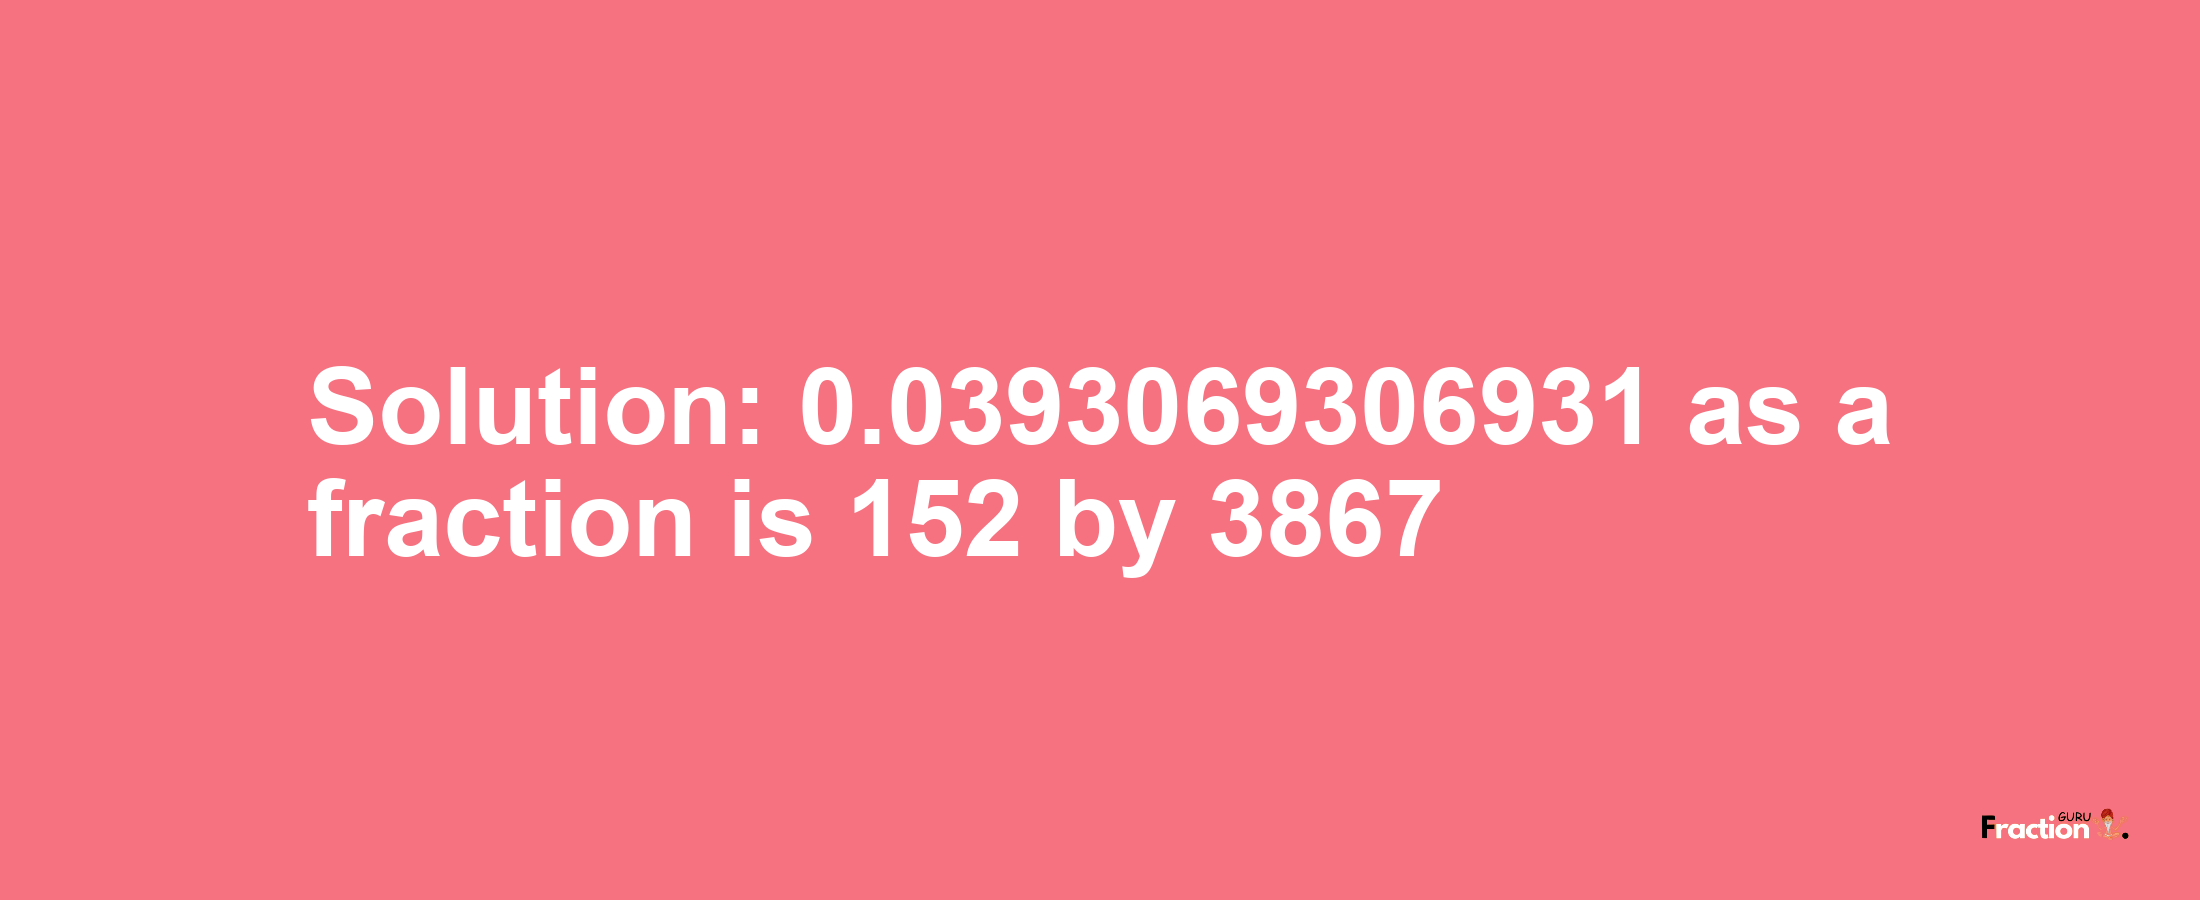 Solution:0.0393069306931 as a fraction is 152/3867